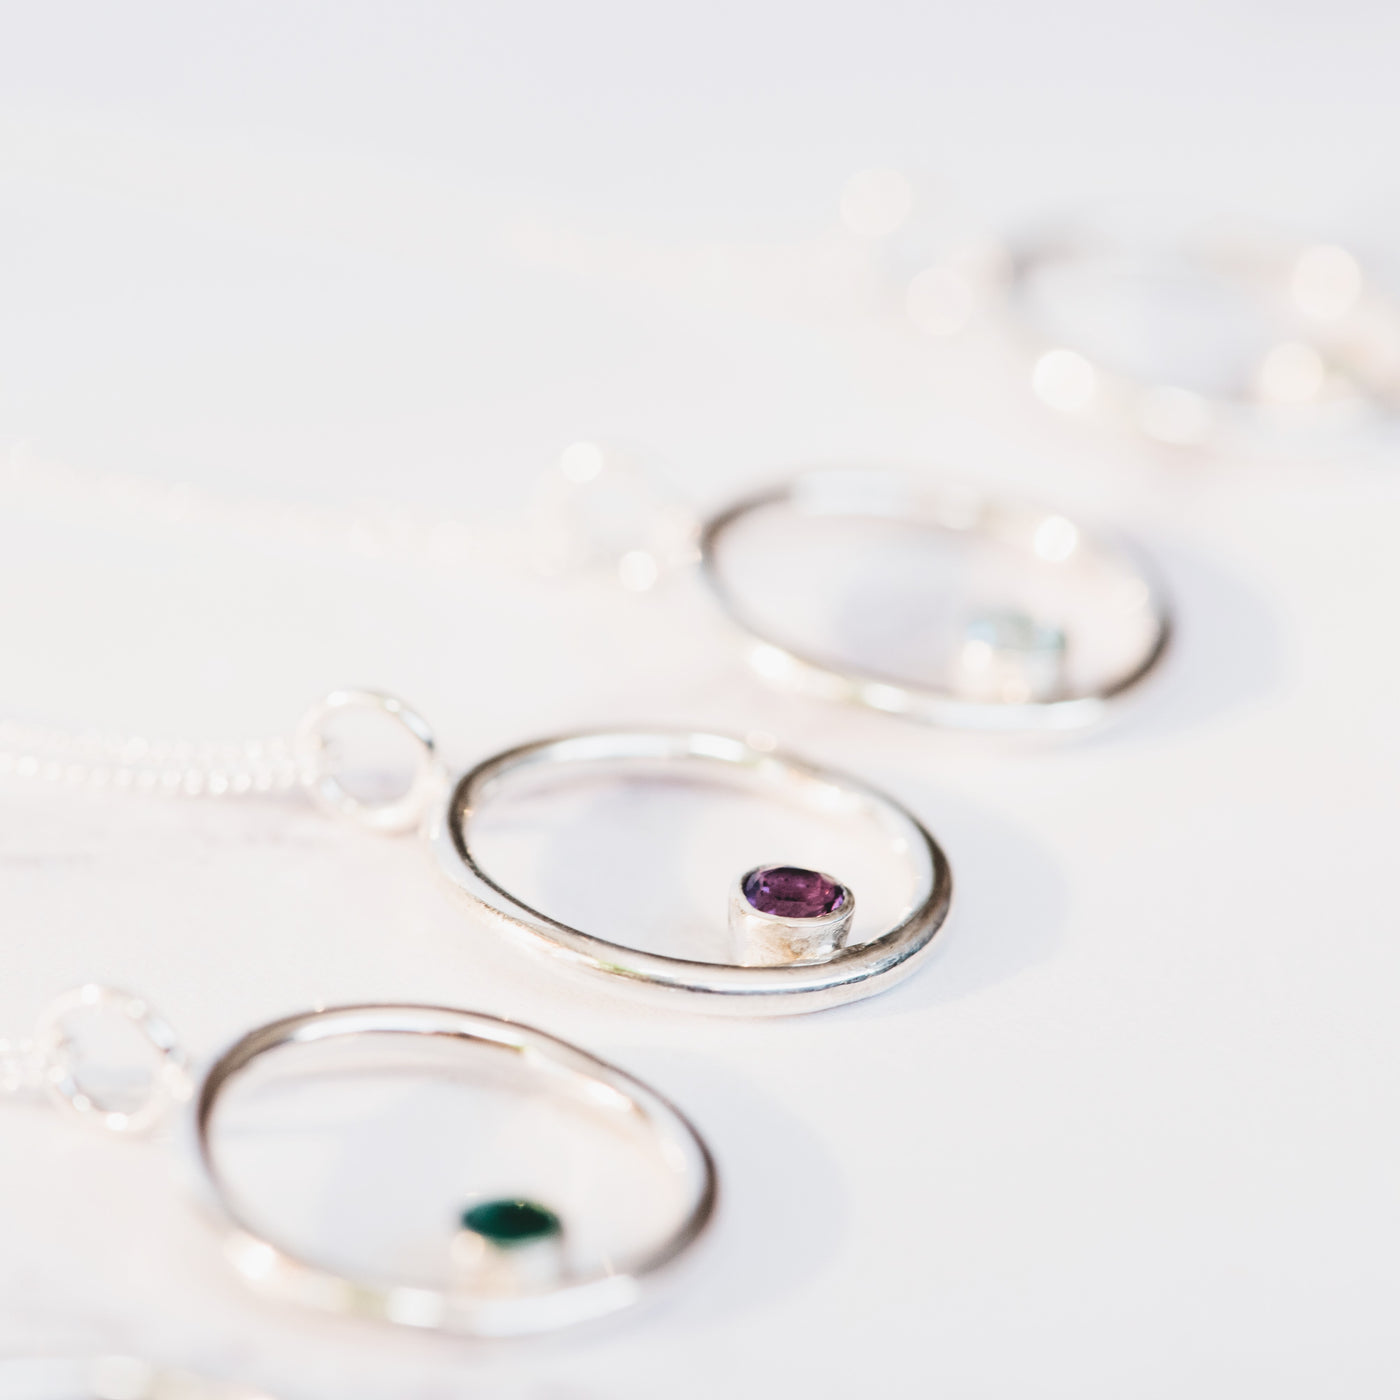 Four silver wire circle pendants in a rose offset with faceted round gemstones and silver trace chain on a white background